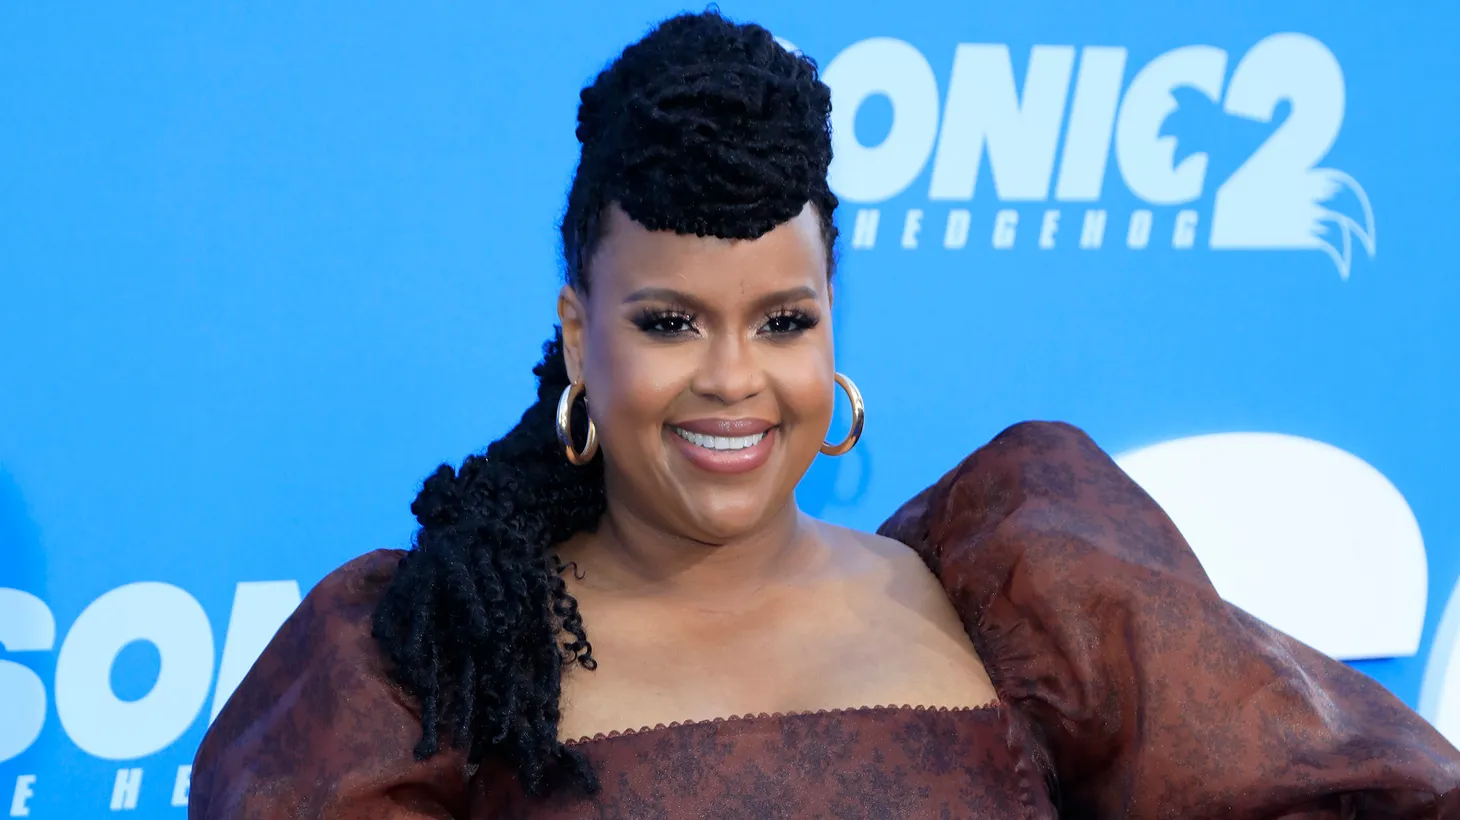 Natasha Rothwell attends the “Sonic The Hedgehog 2” premiere in Los Angeles.